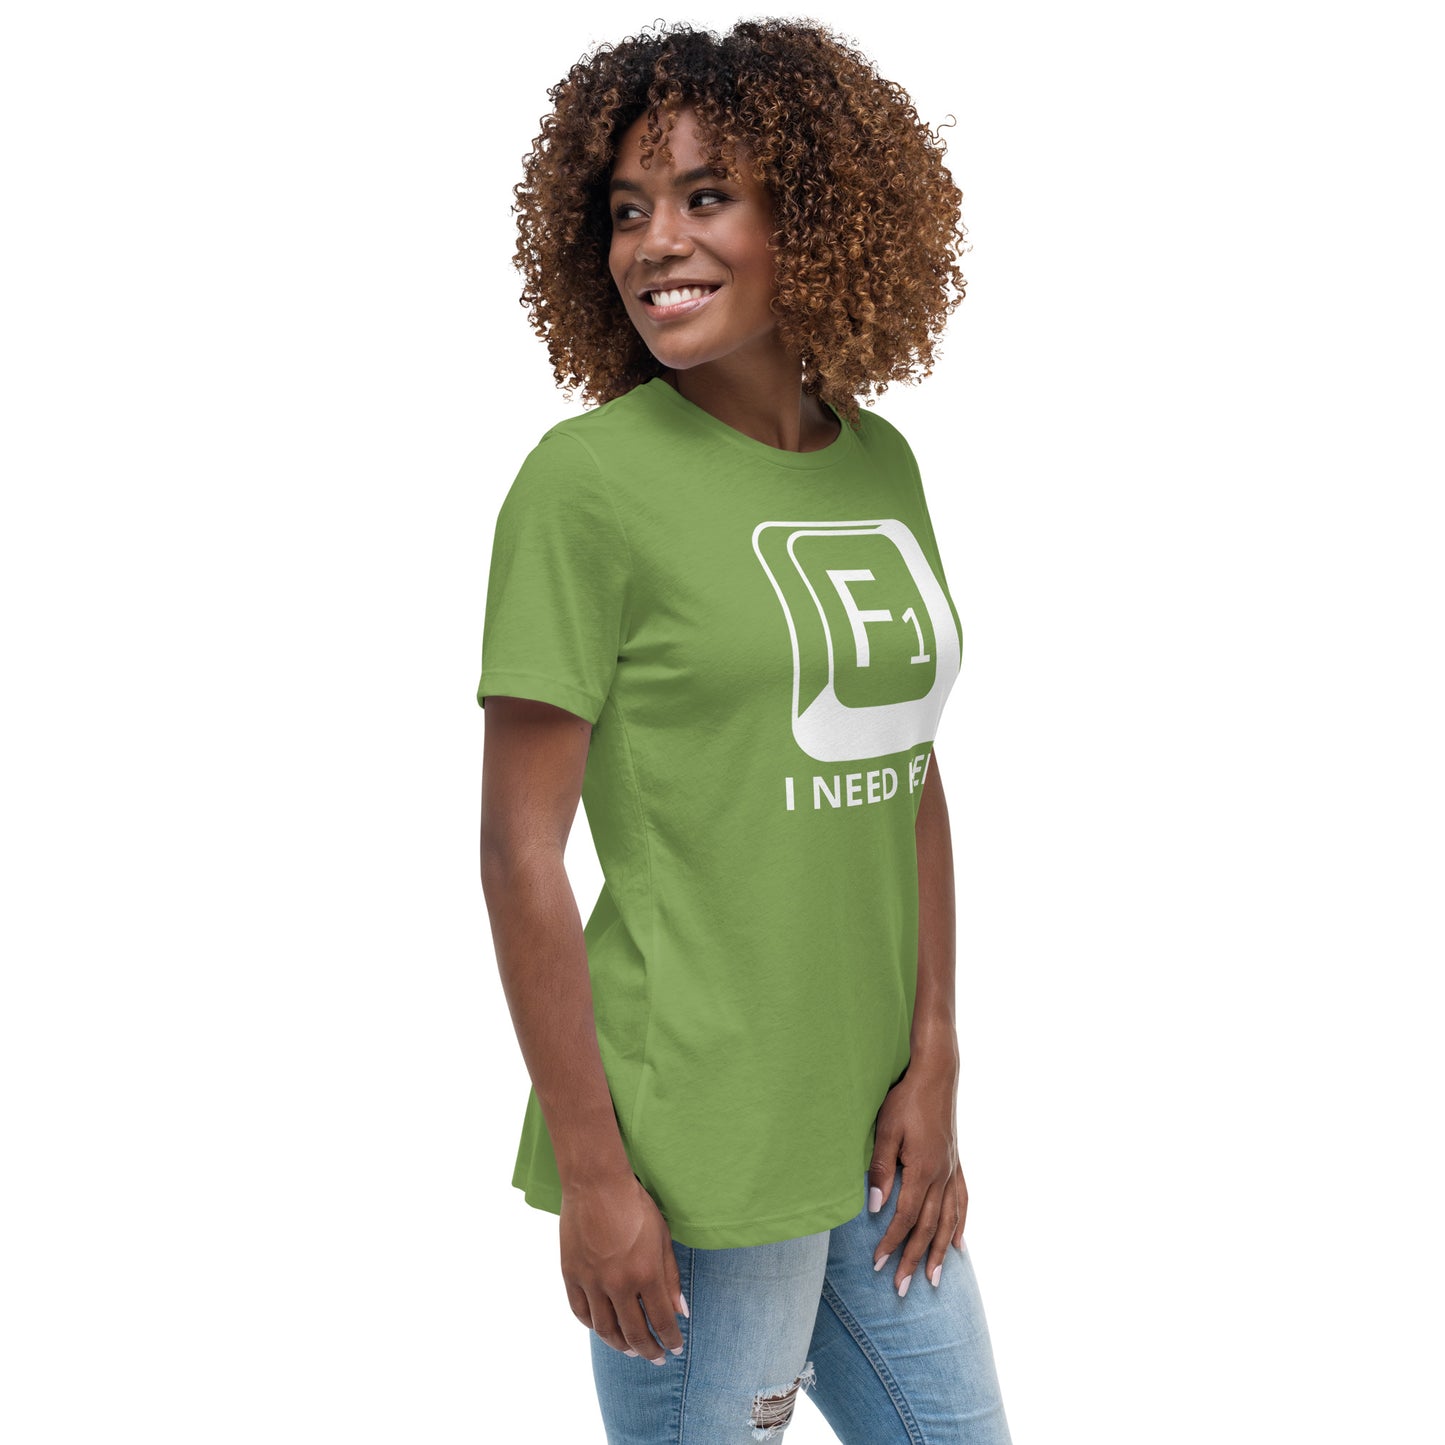 Woman with leaf green  t-shirt with picture of "F1" key and text "I need help"